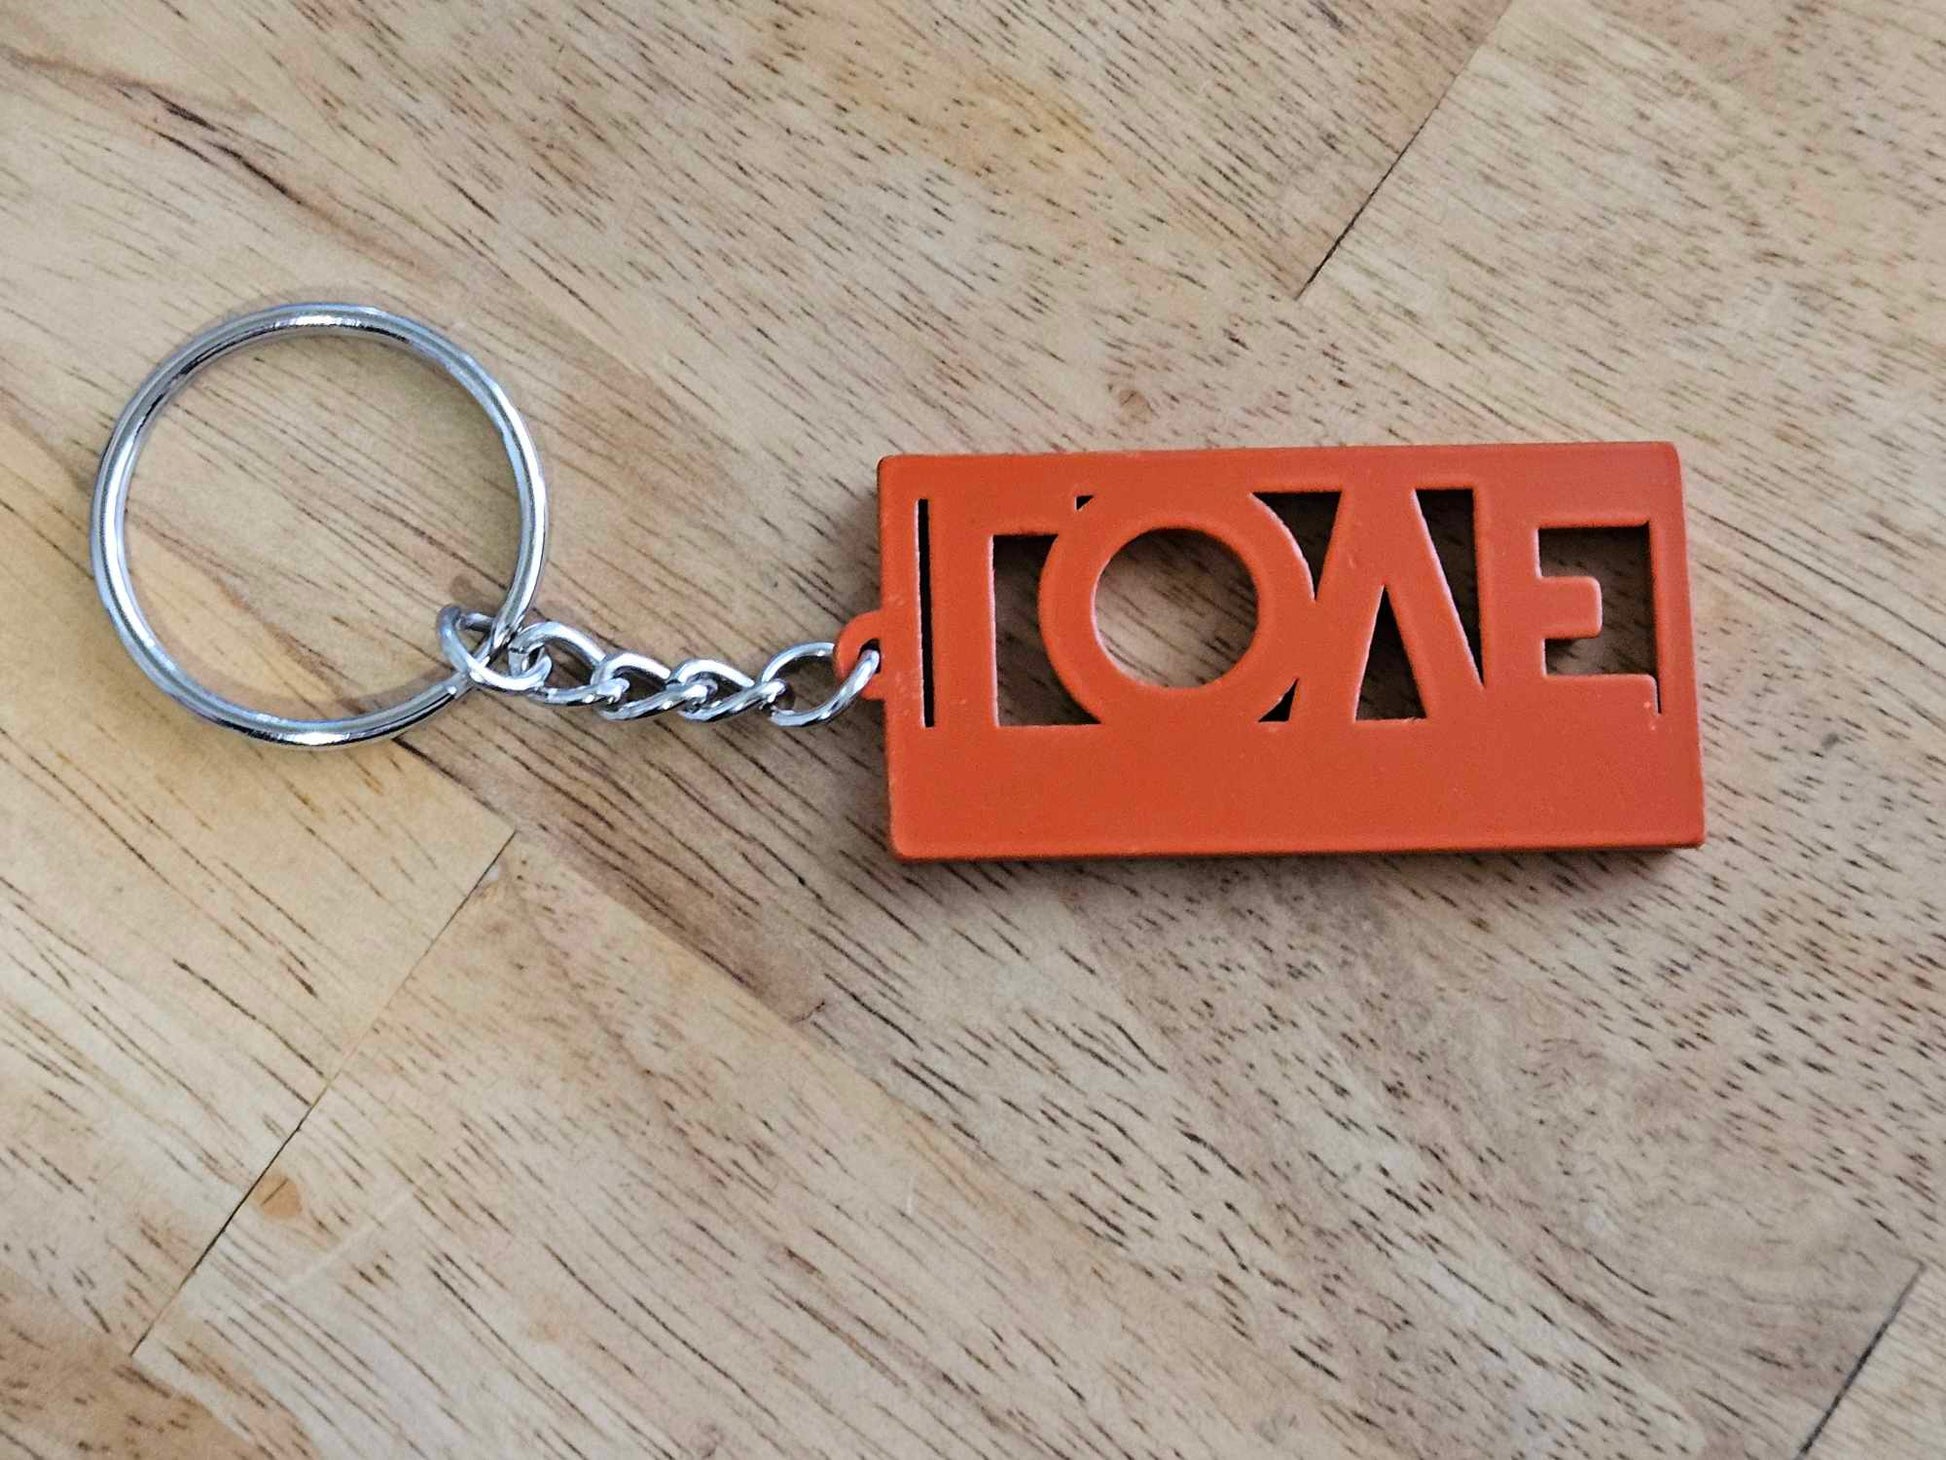 Virginia is For Lovers LOVE Keychain - Dusty's Country Store